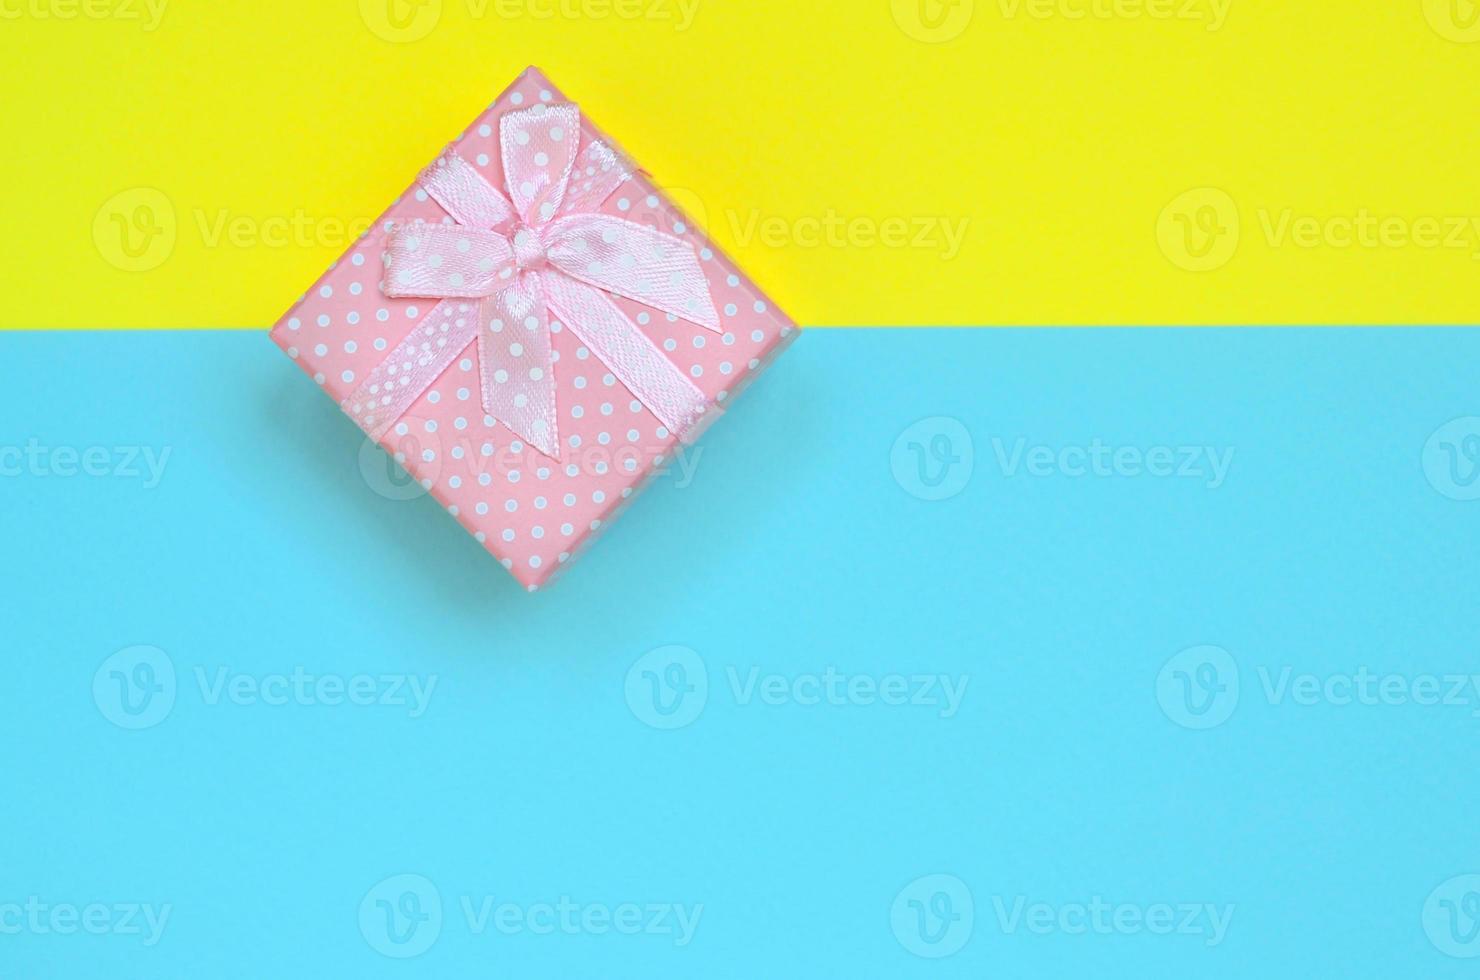 Small pink gift box lie on texture background of fashion pastel blue and yellow colors paper in minimal concept photo